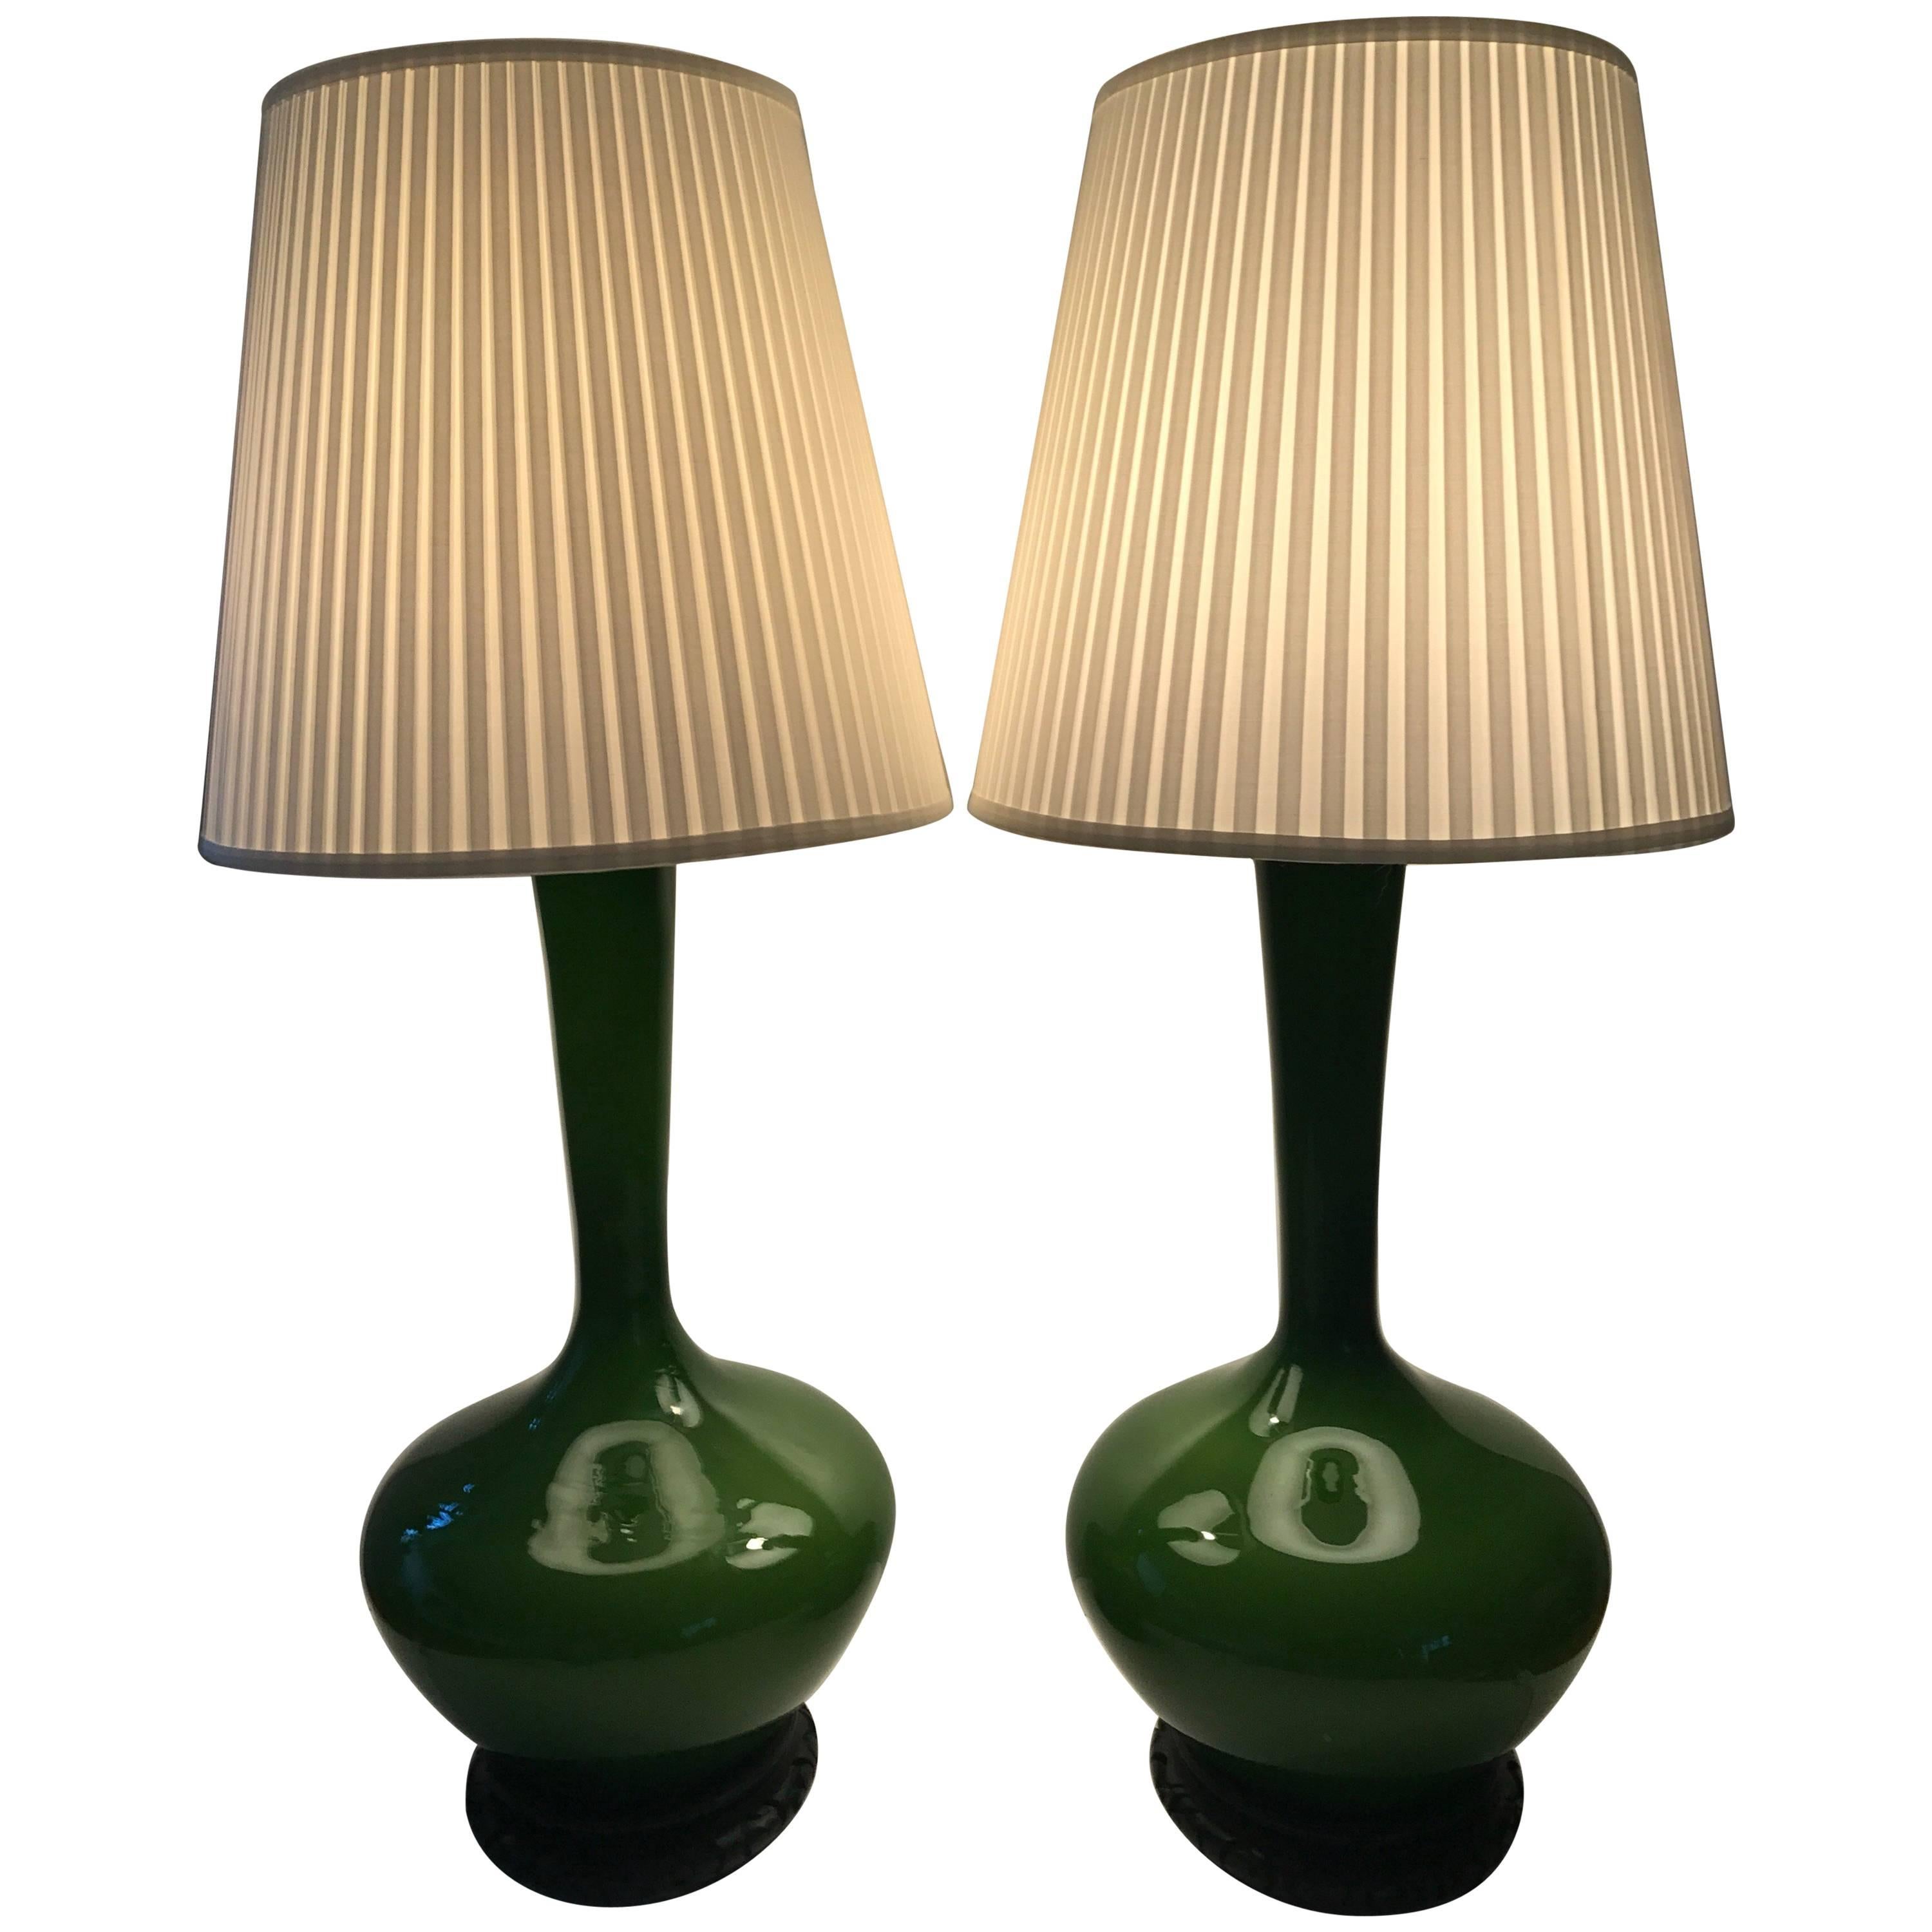 Rare Very Large Swedish Orrefors Pair of Green Opaline Glass Table Lamps, 1950 For Sale